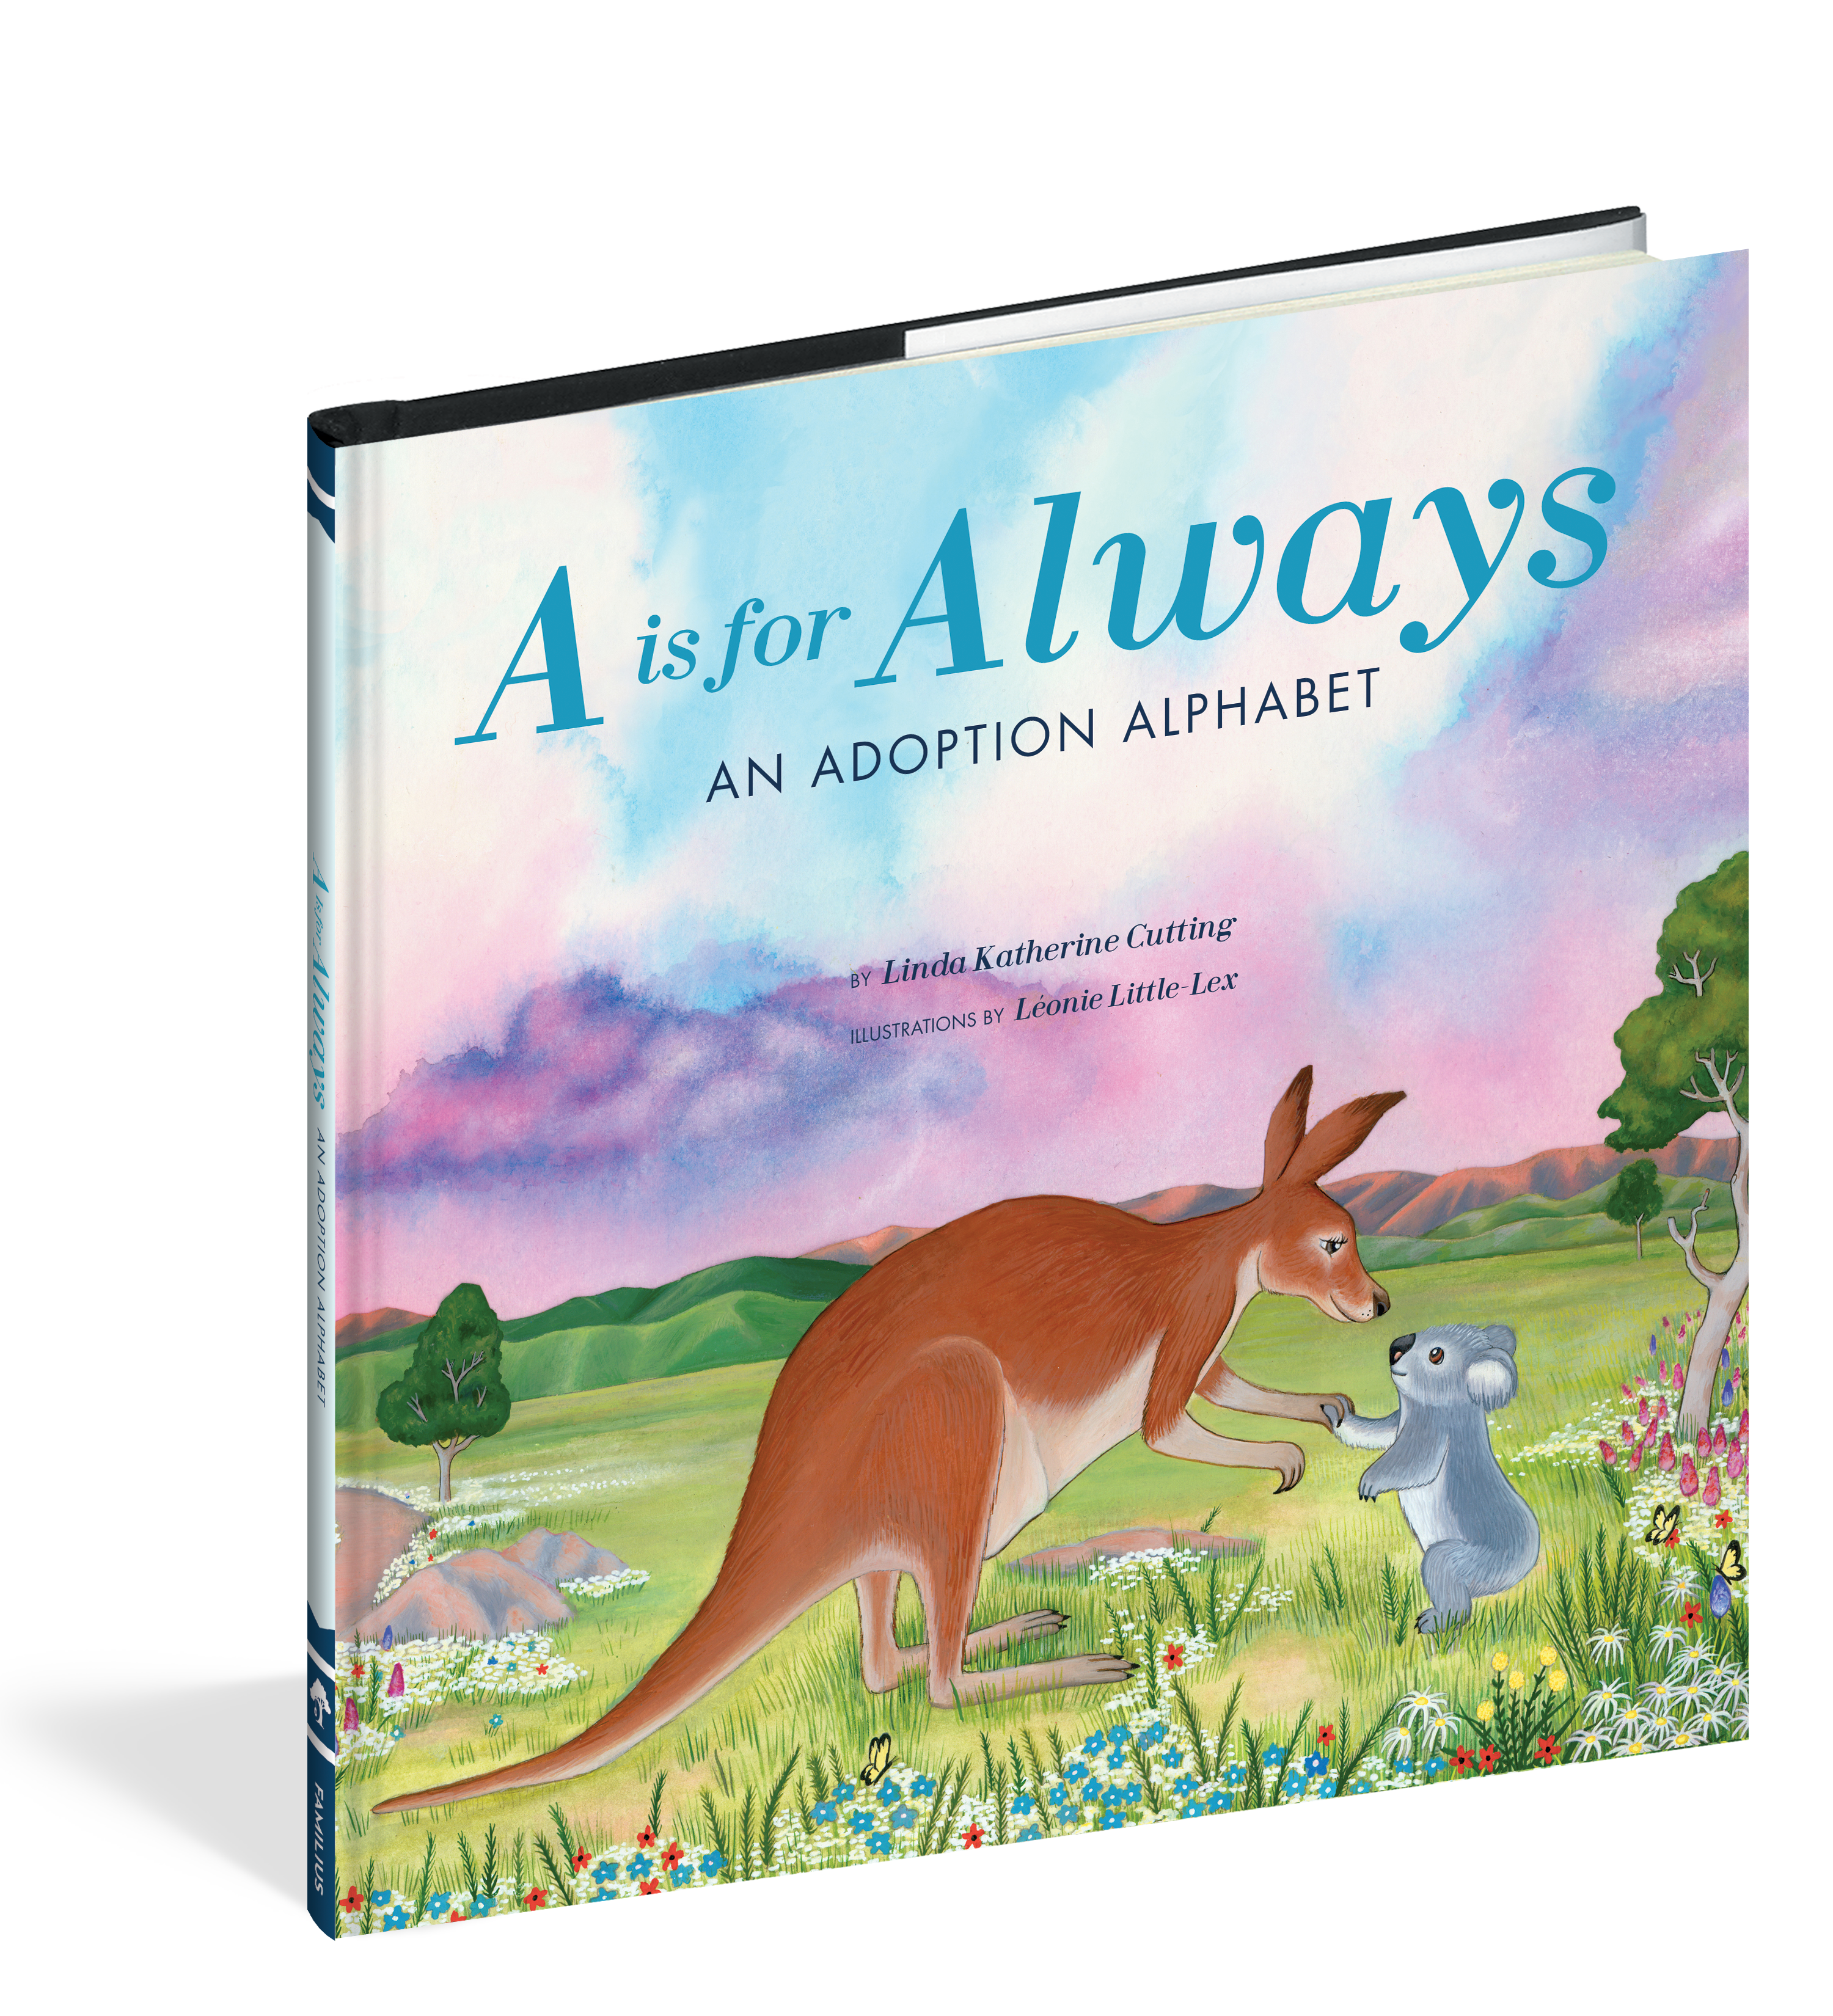 The cover of the book A Is for Always.